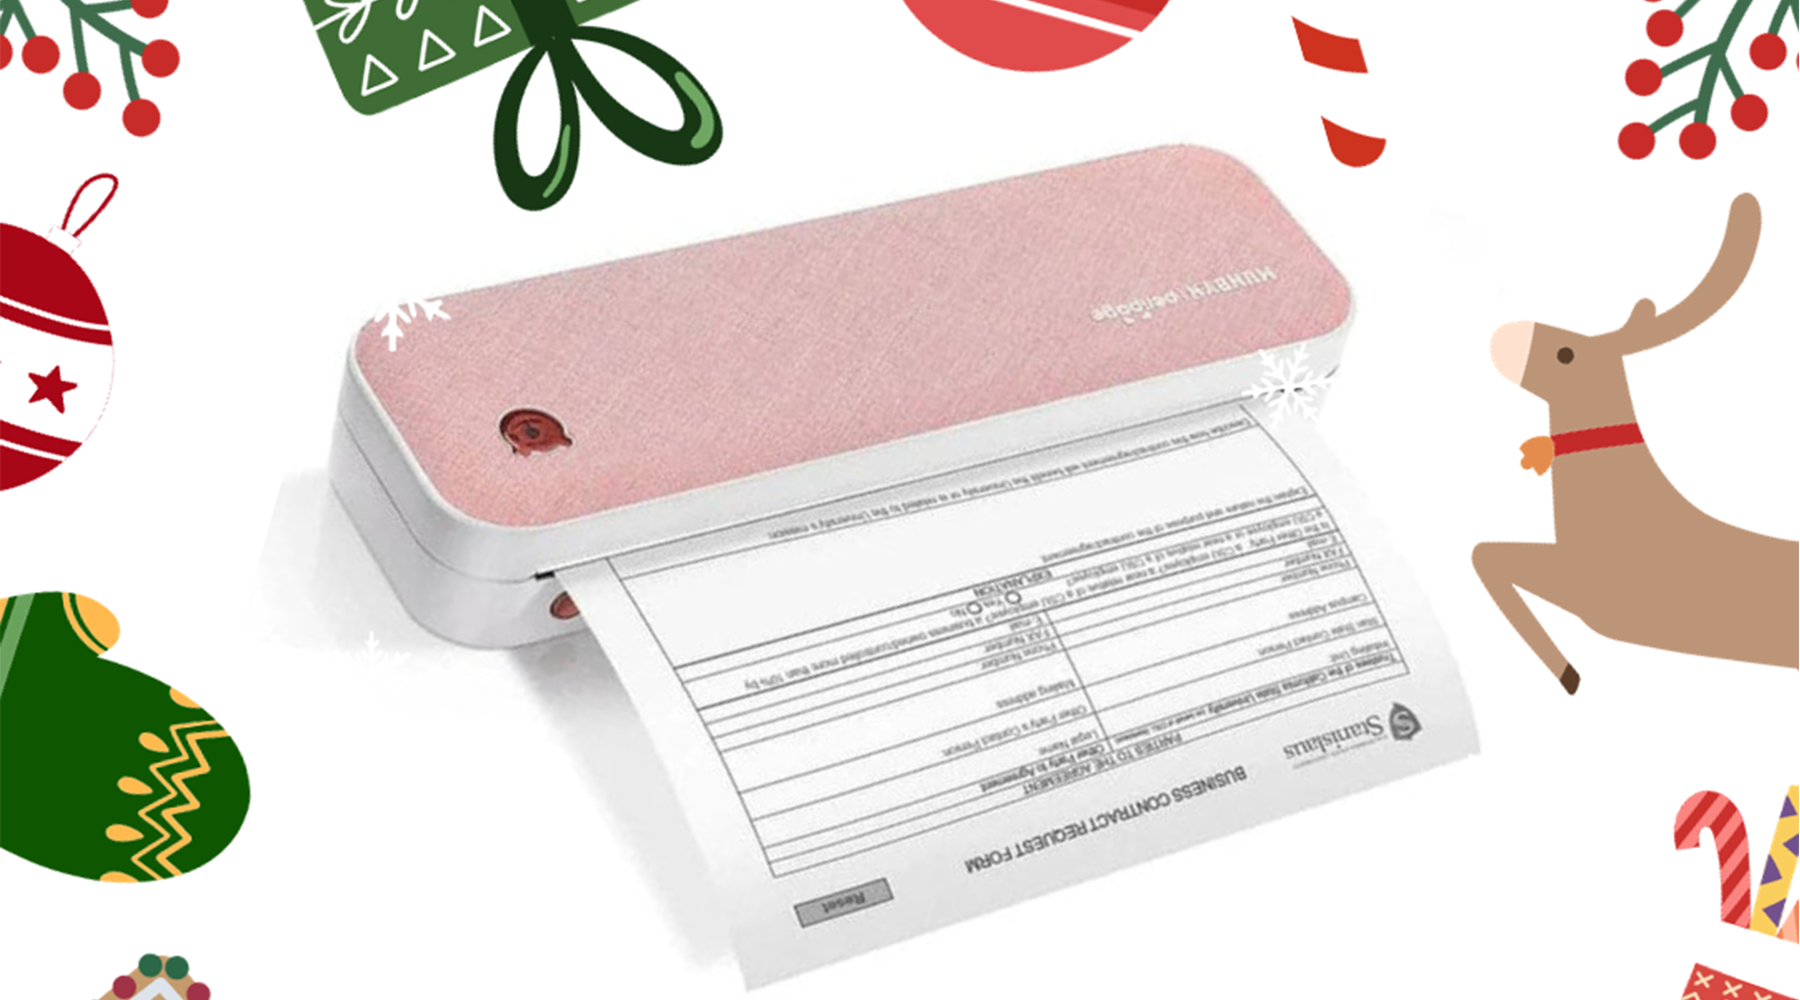 10 Reasons Why a Portable Printer is the Perfect Christmas Gift for Loved Ones